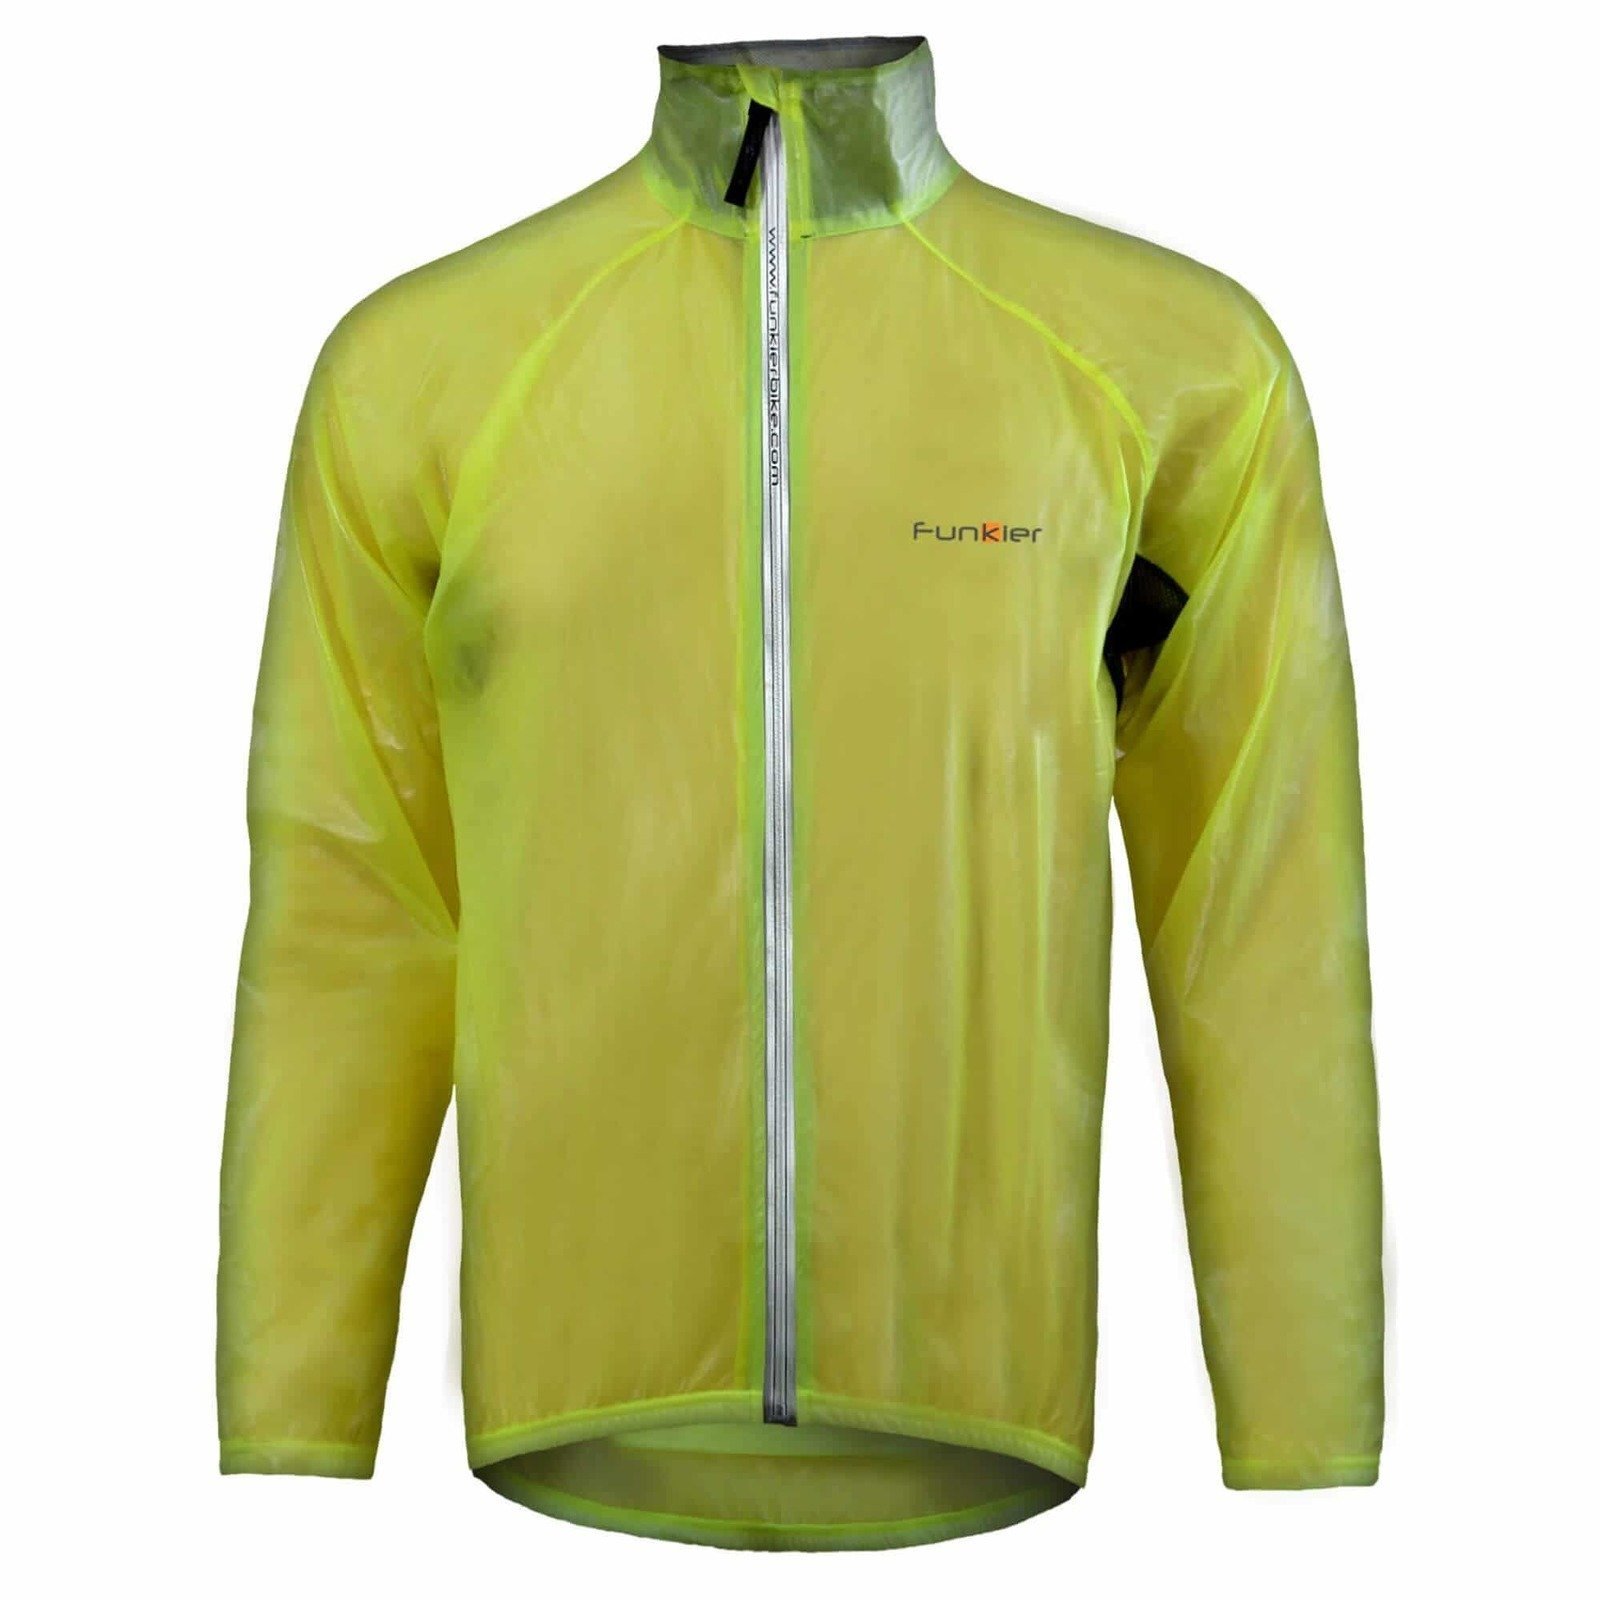 Cycling Jacket, Vest Funkier Lecco Clear Yellow XL